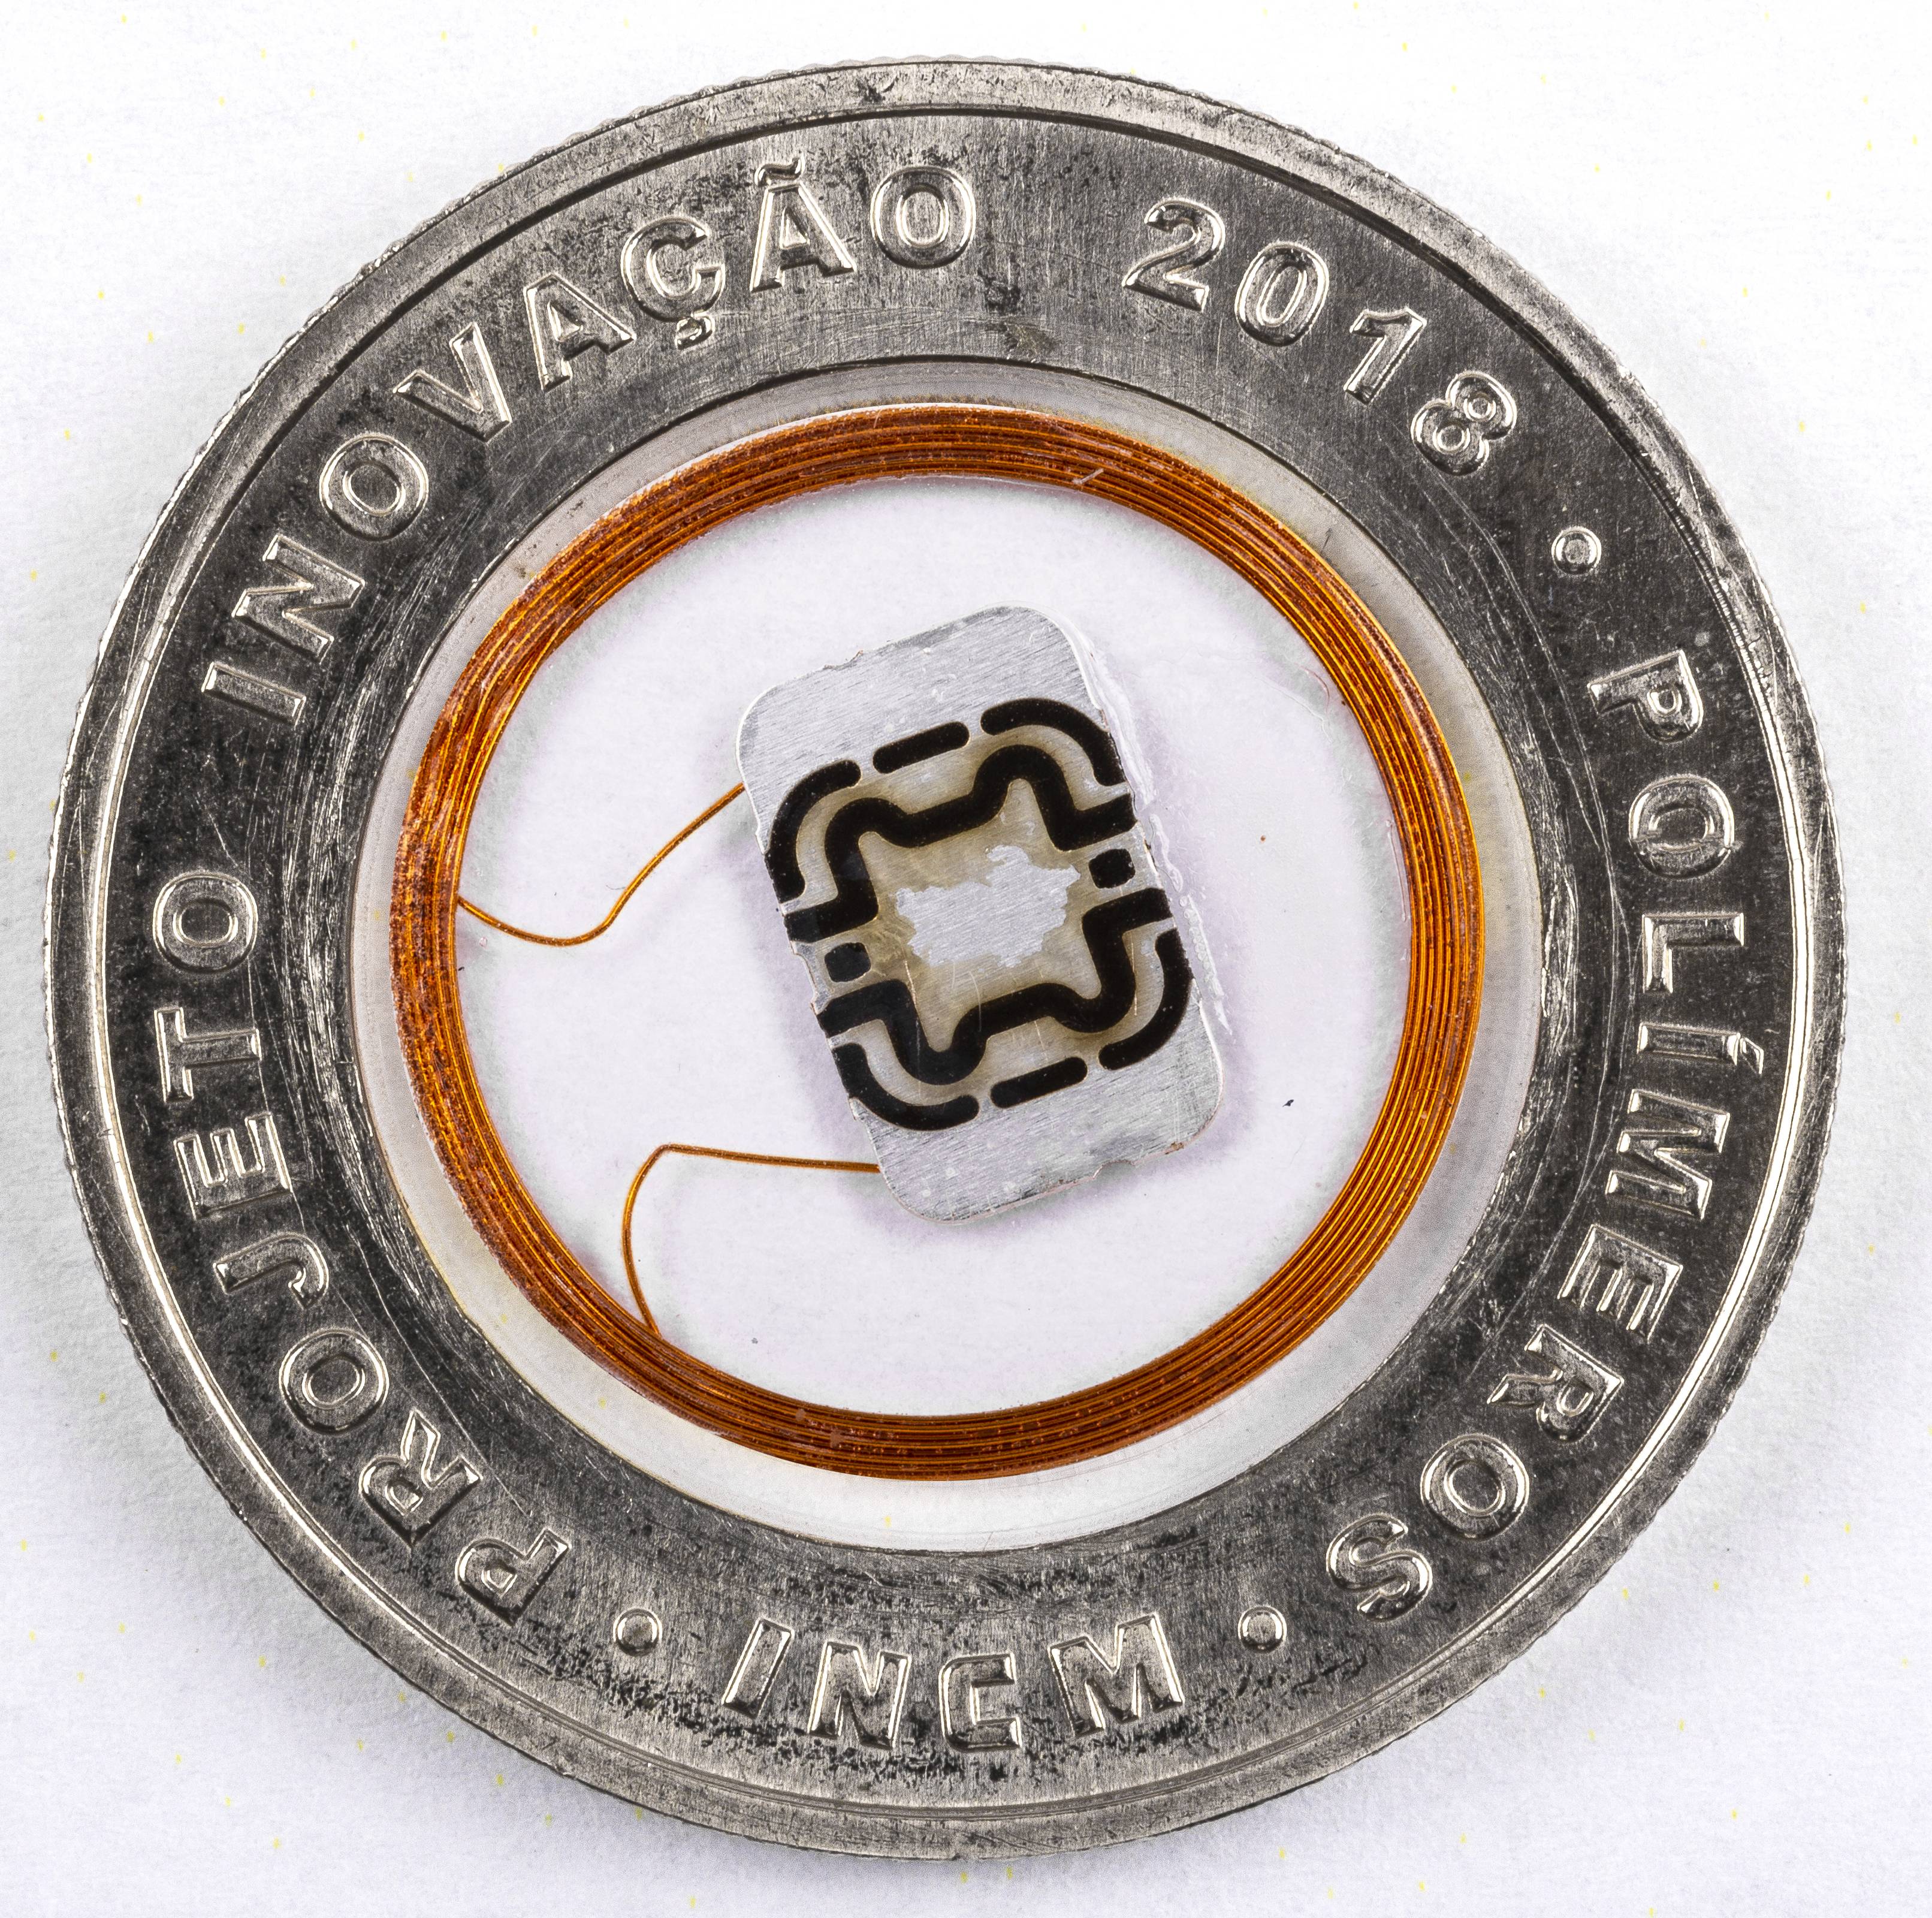 Stunning euro polymer pattern coin of Portugal